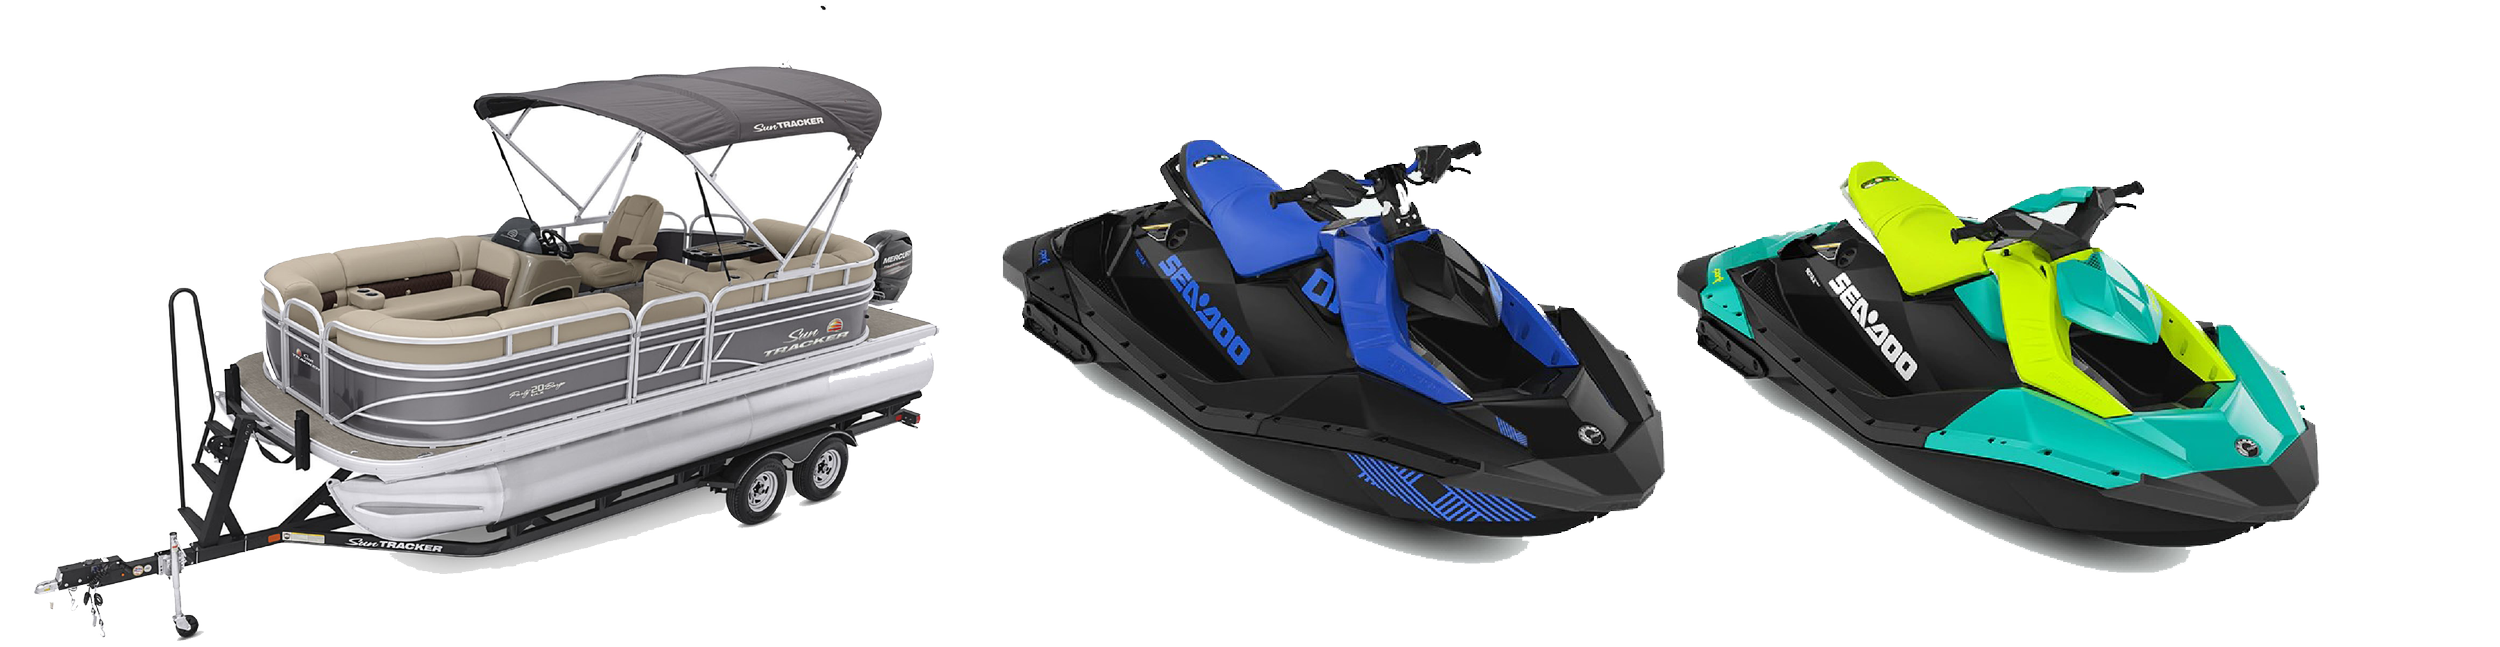 Popular Links — Kra-Z's Snowmobile Rentals and Backcountry Guide